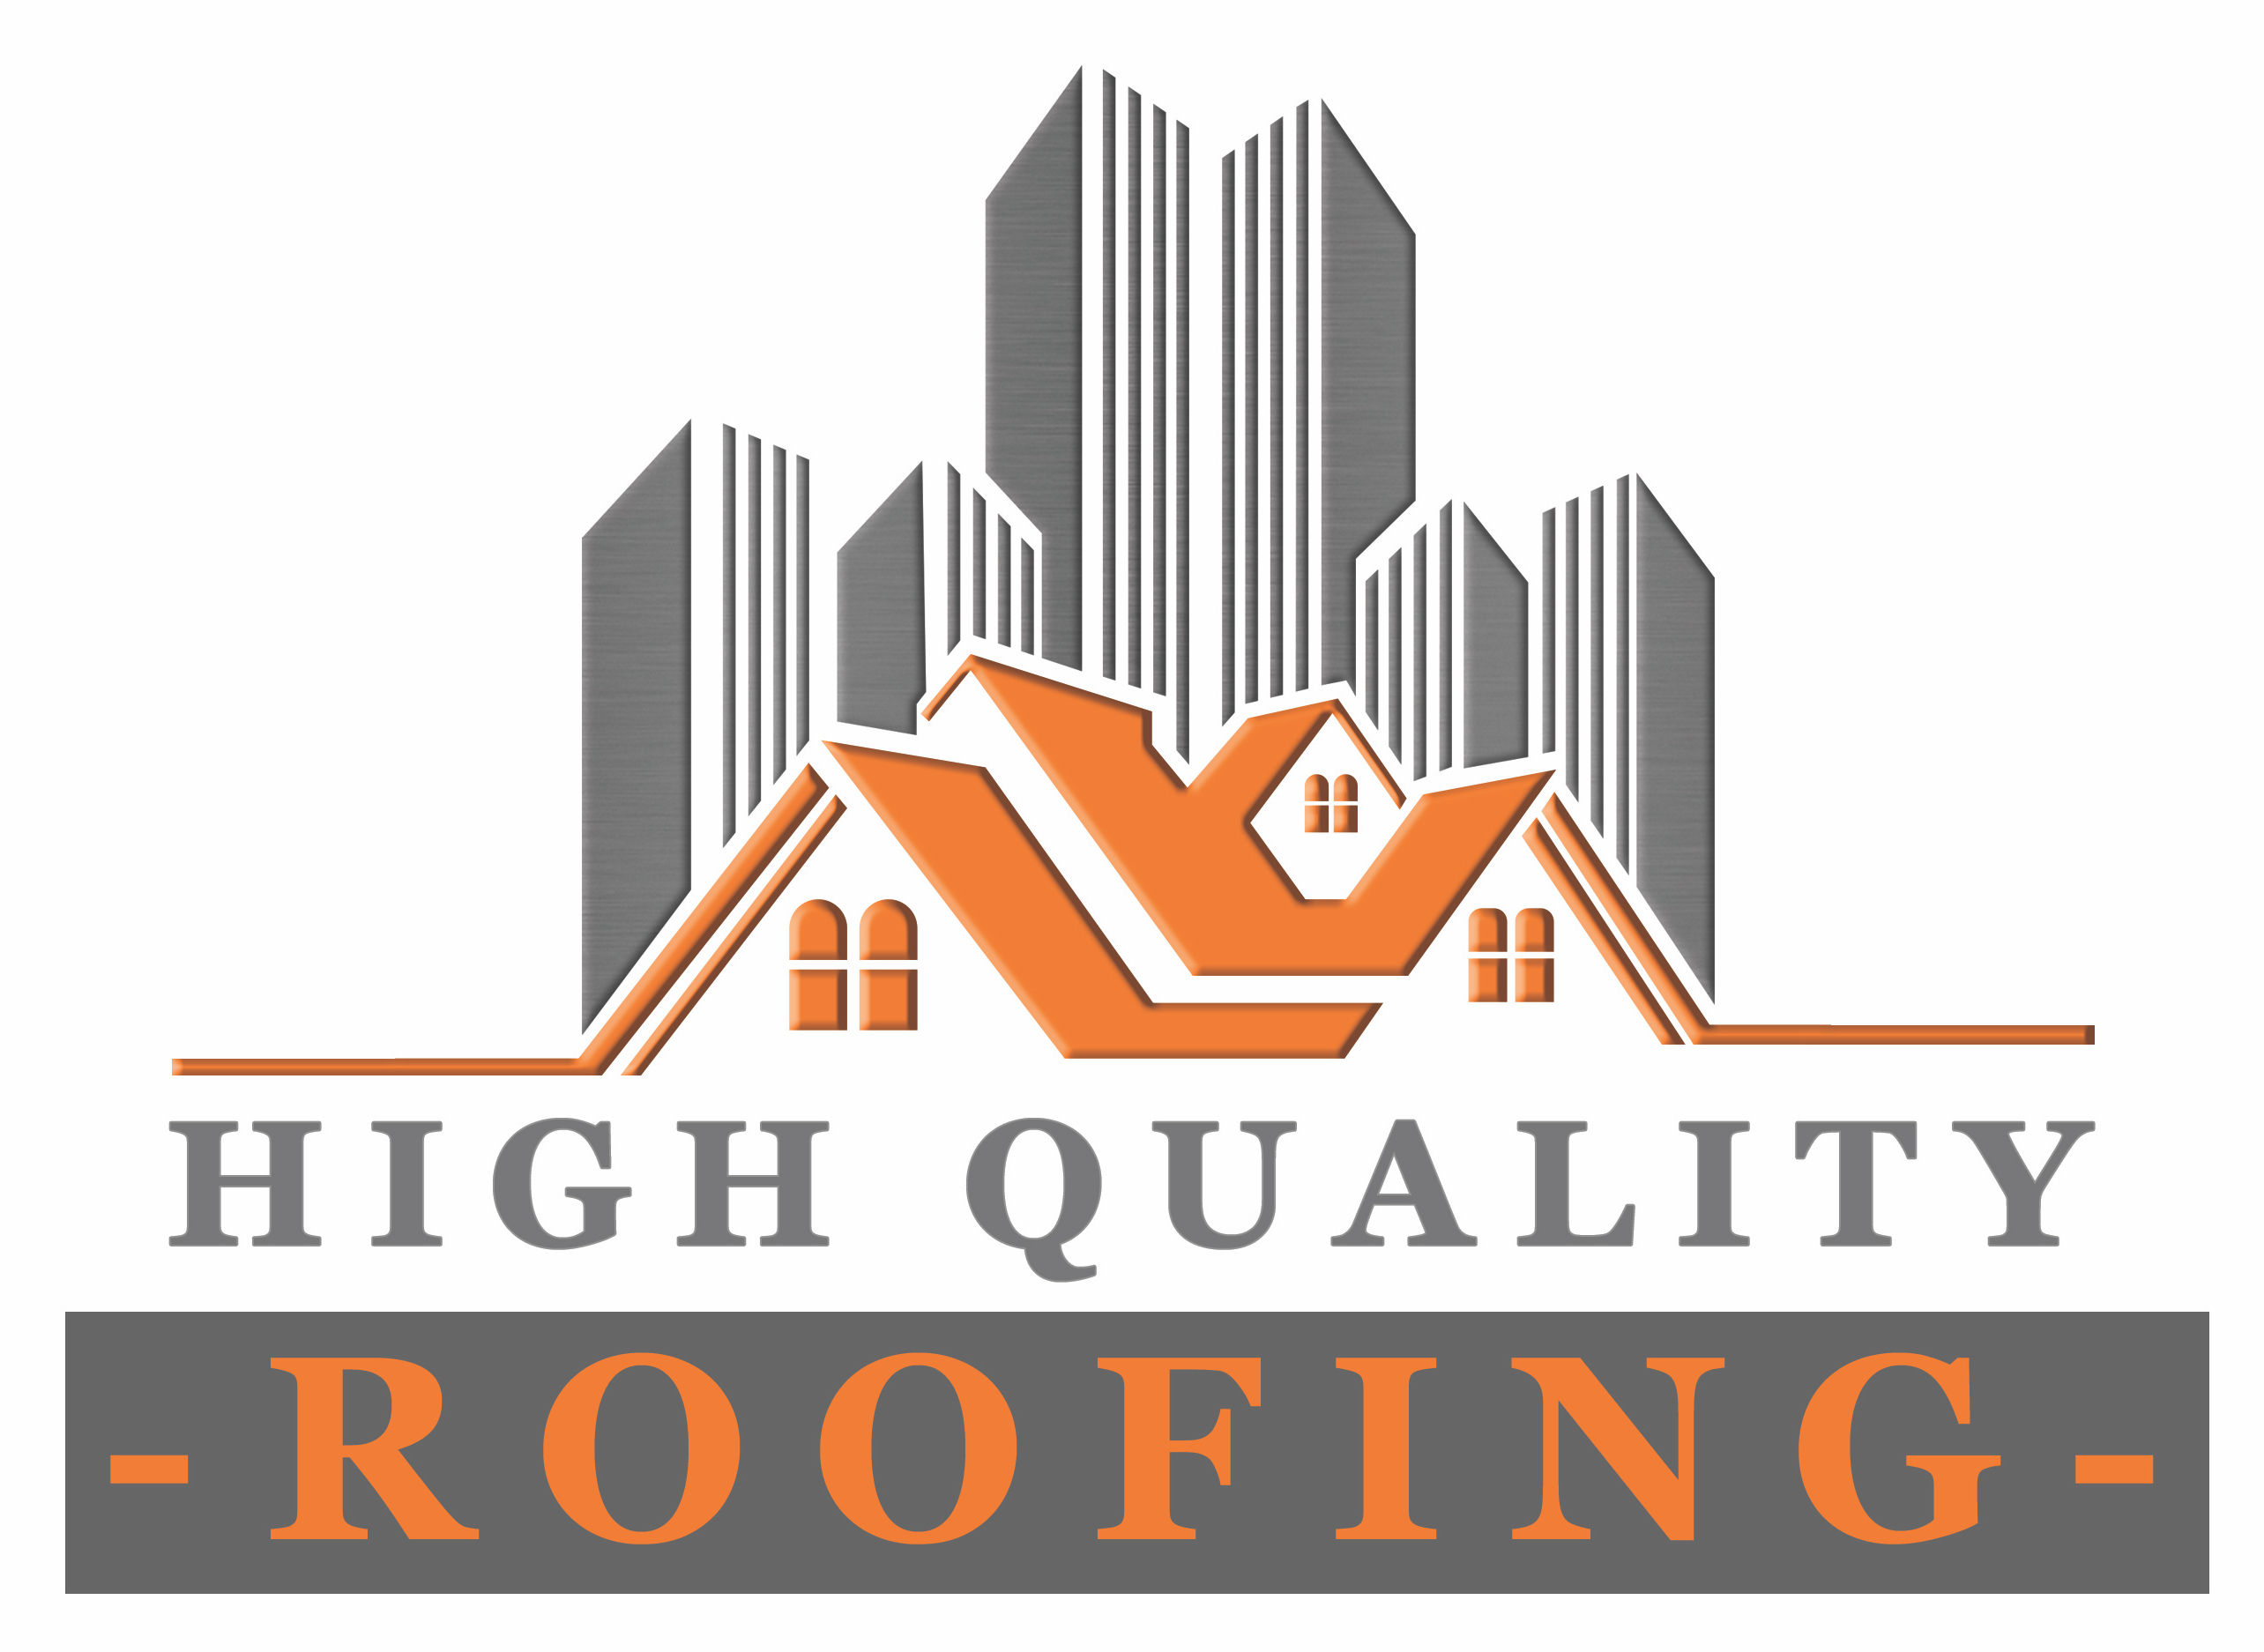 High Quality Roofing (White background)